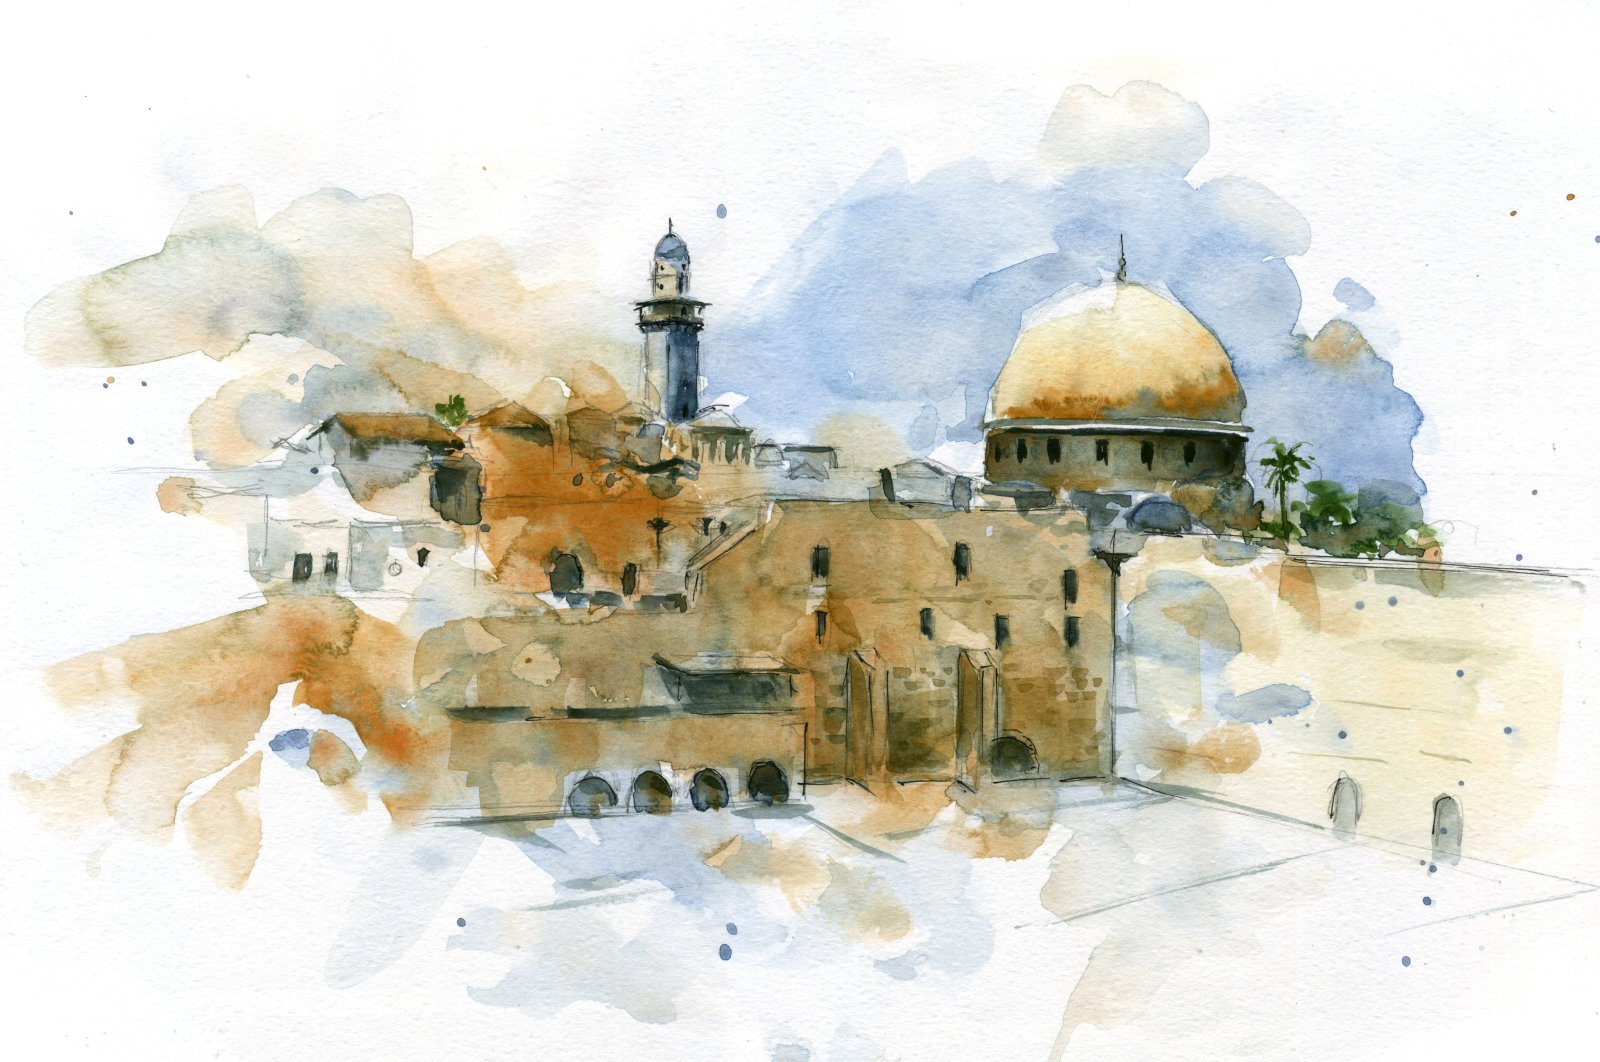 A watercolor painting of Jerusalem, the Israeli-occupied historic city that has a key role in the decadeslong Israeli-Palestinian conflict. (Photo by Shutterstock)